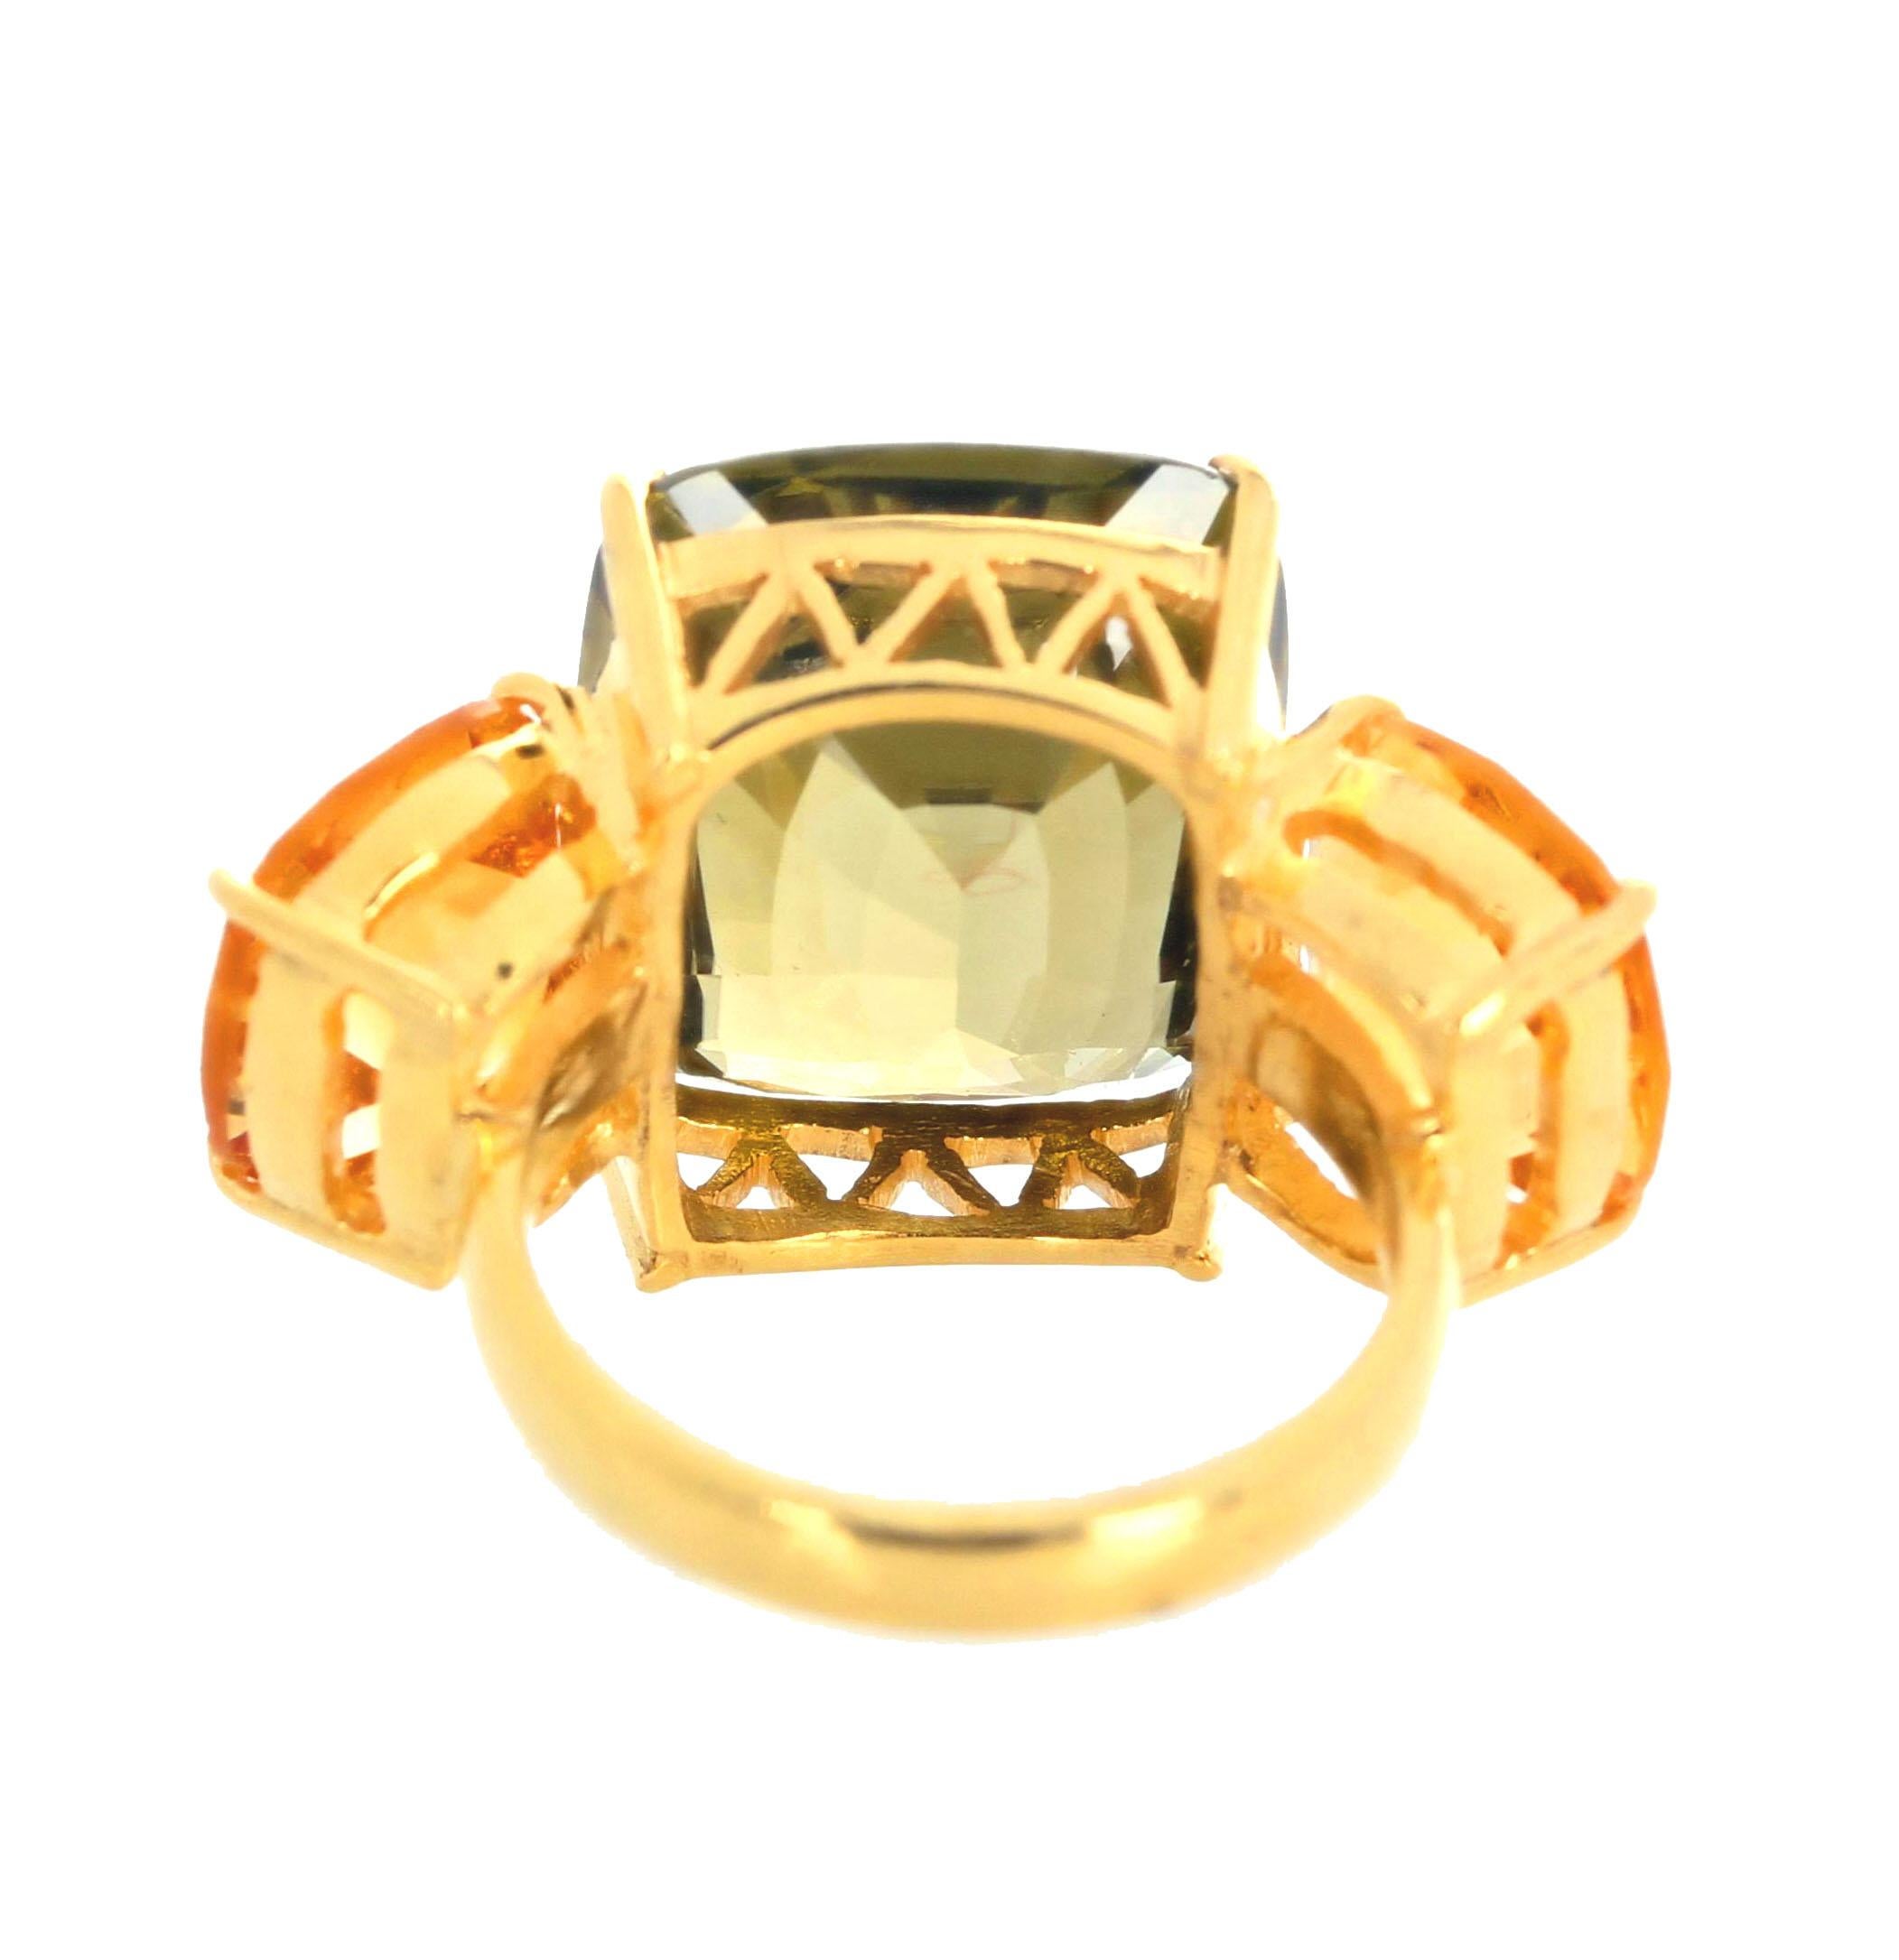 Cushion Cut AJD VERY RARE Intensely Brilliant Fiery Green 22.68 Ct ZIRCON & Citrine Ring For Sale